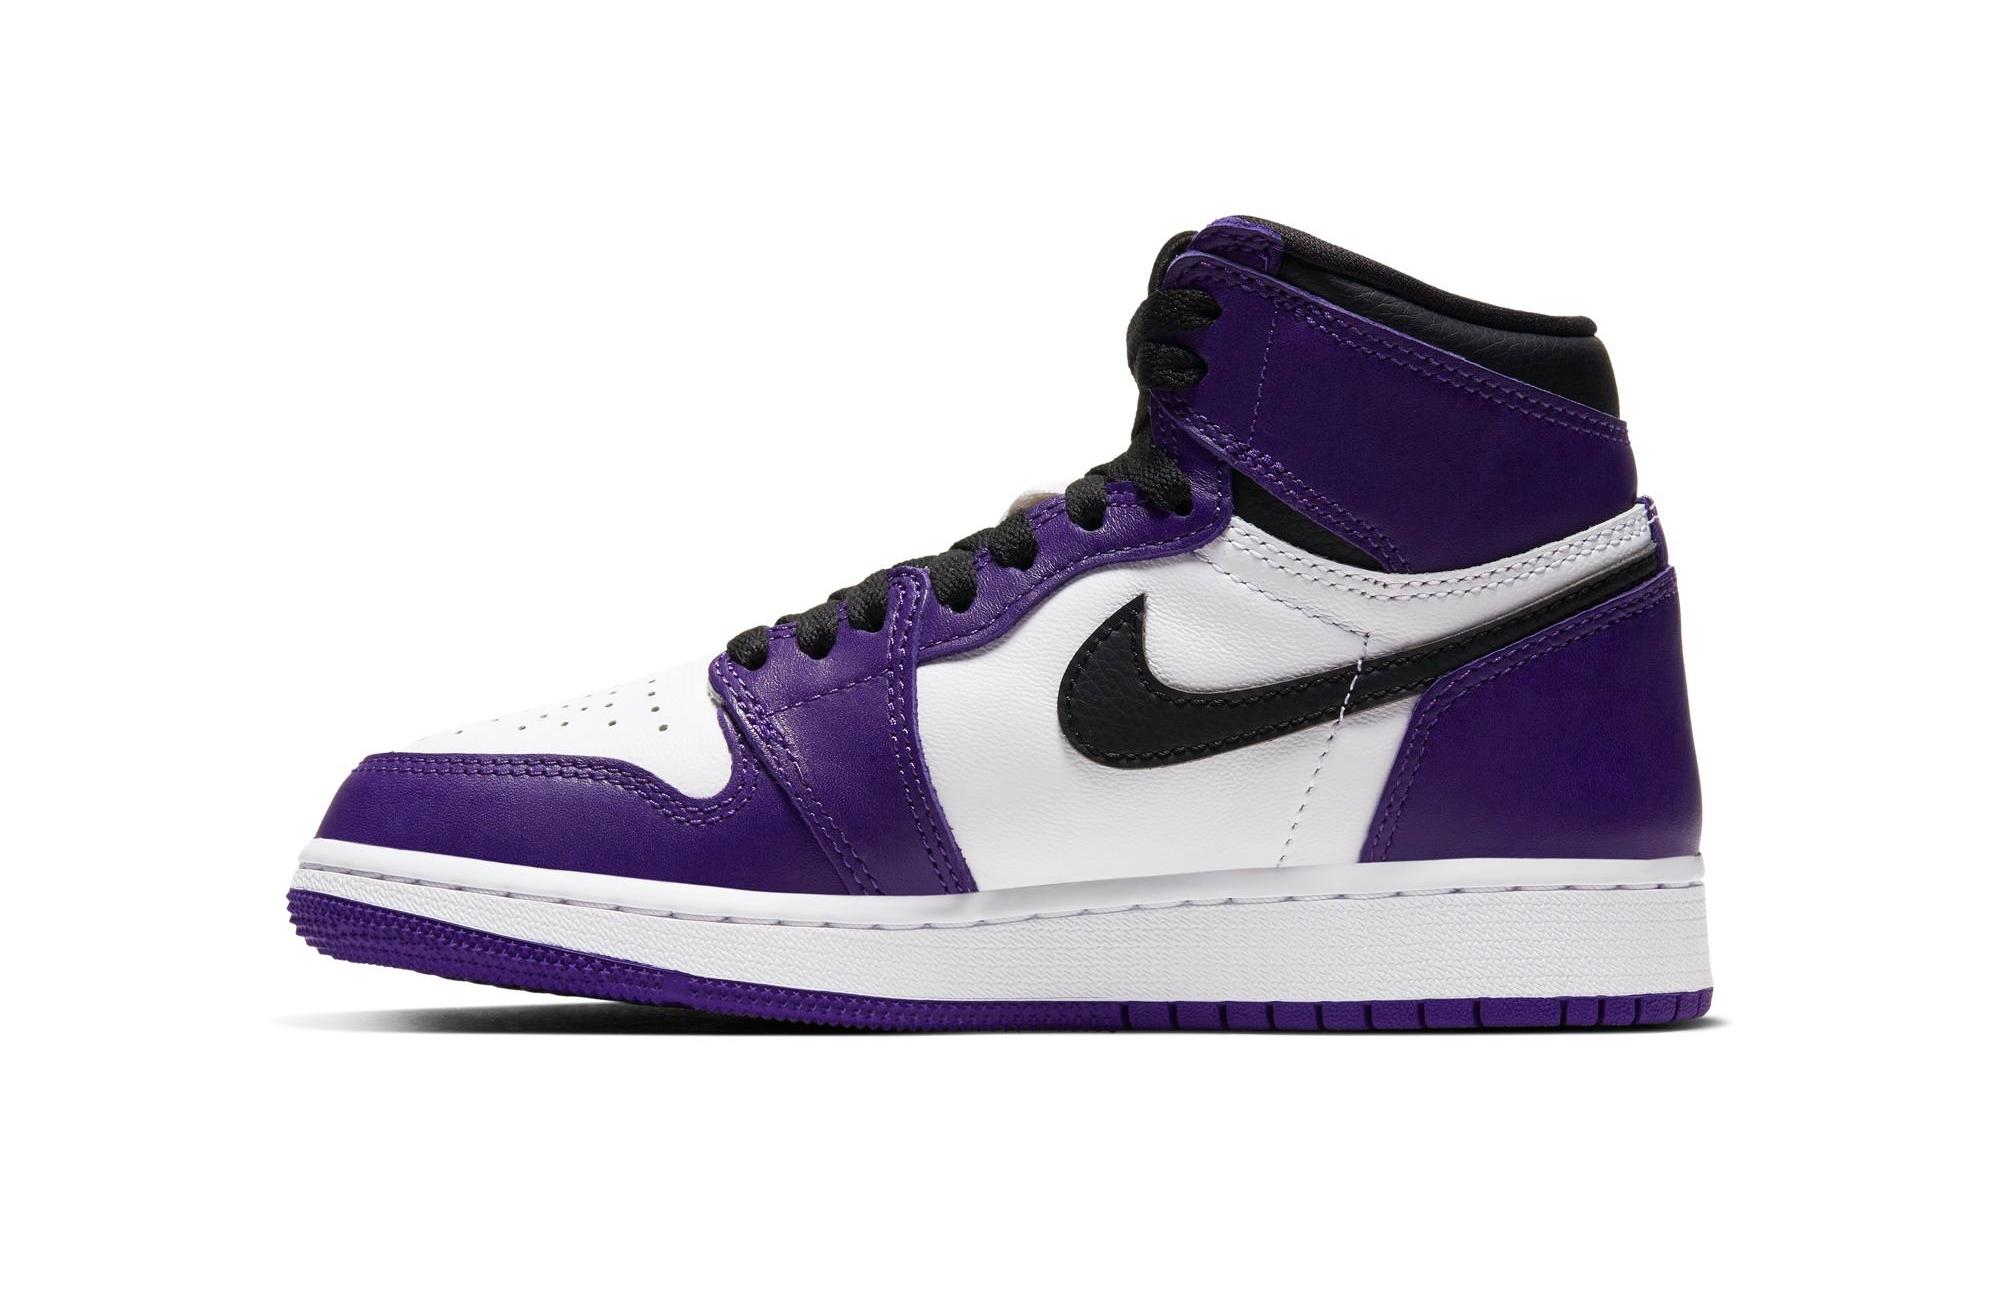 1/6 Scale Sneakers Sports Shoes Trainers Air AJ1 Purple 